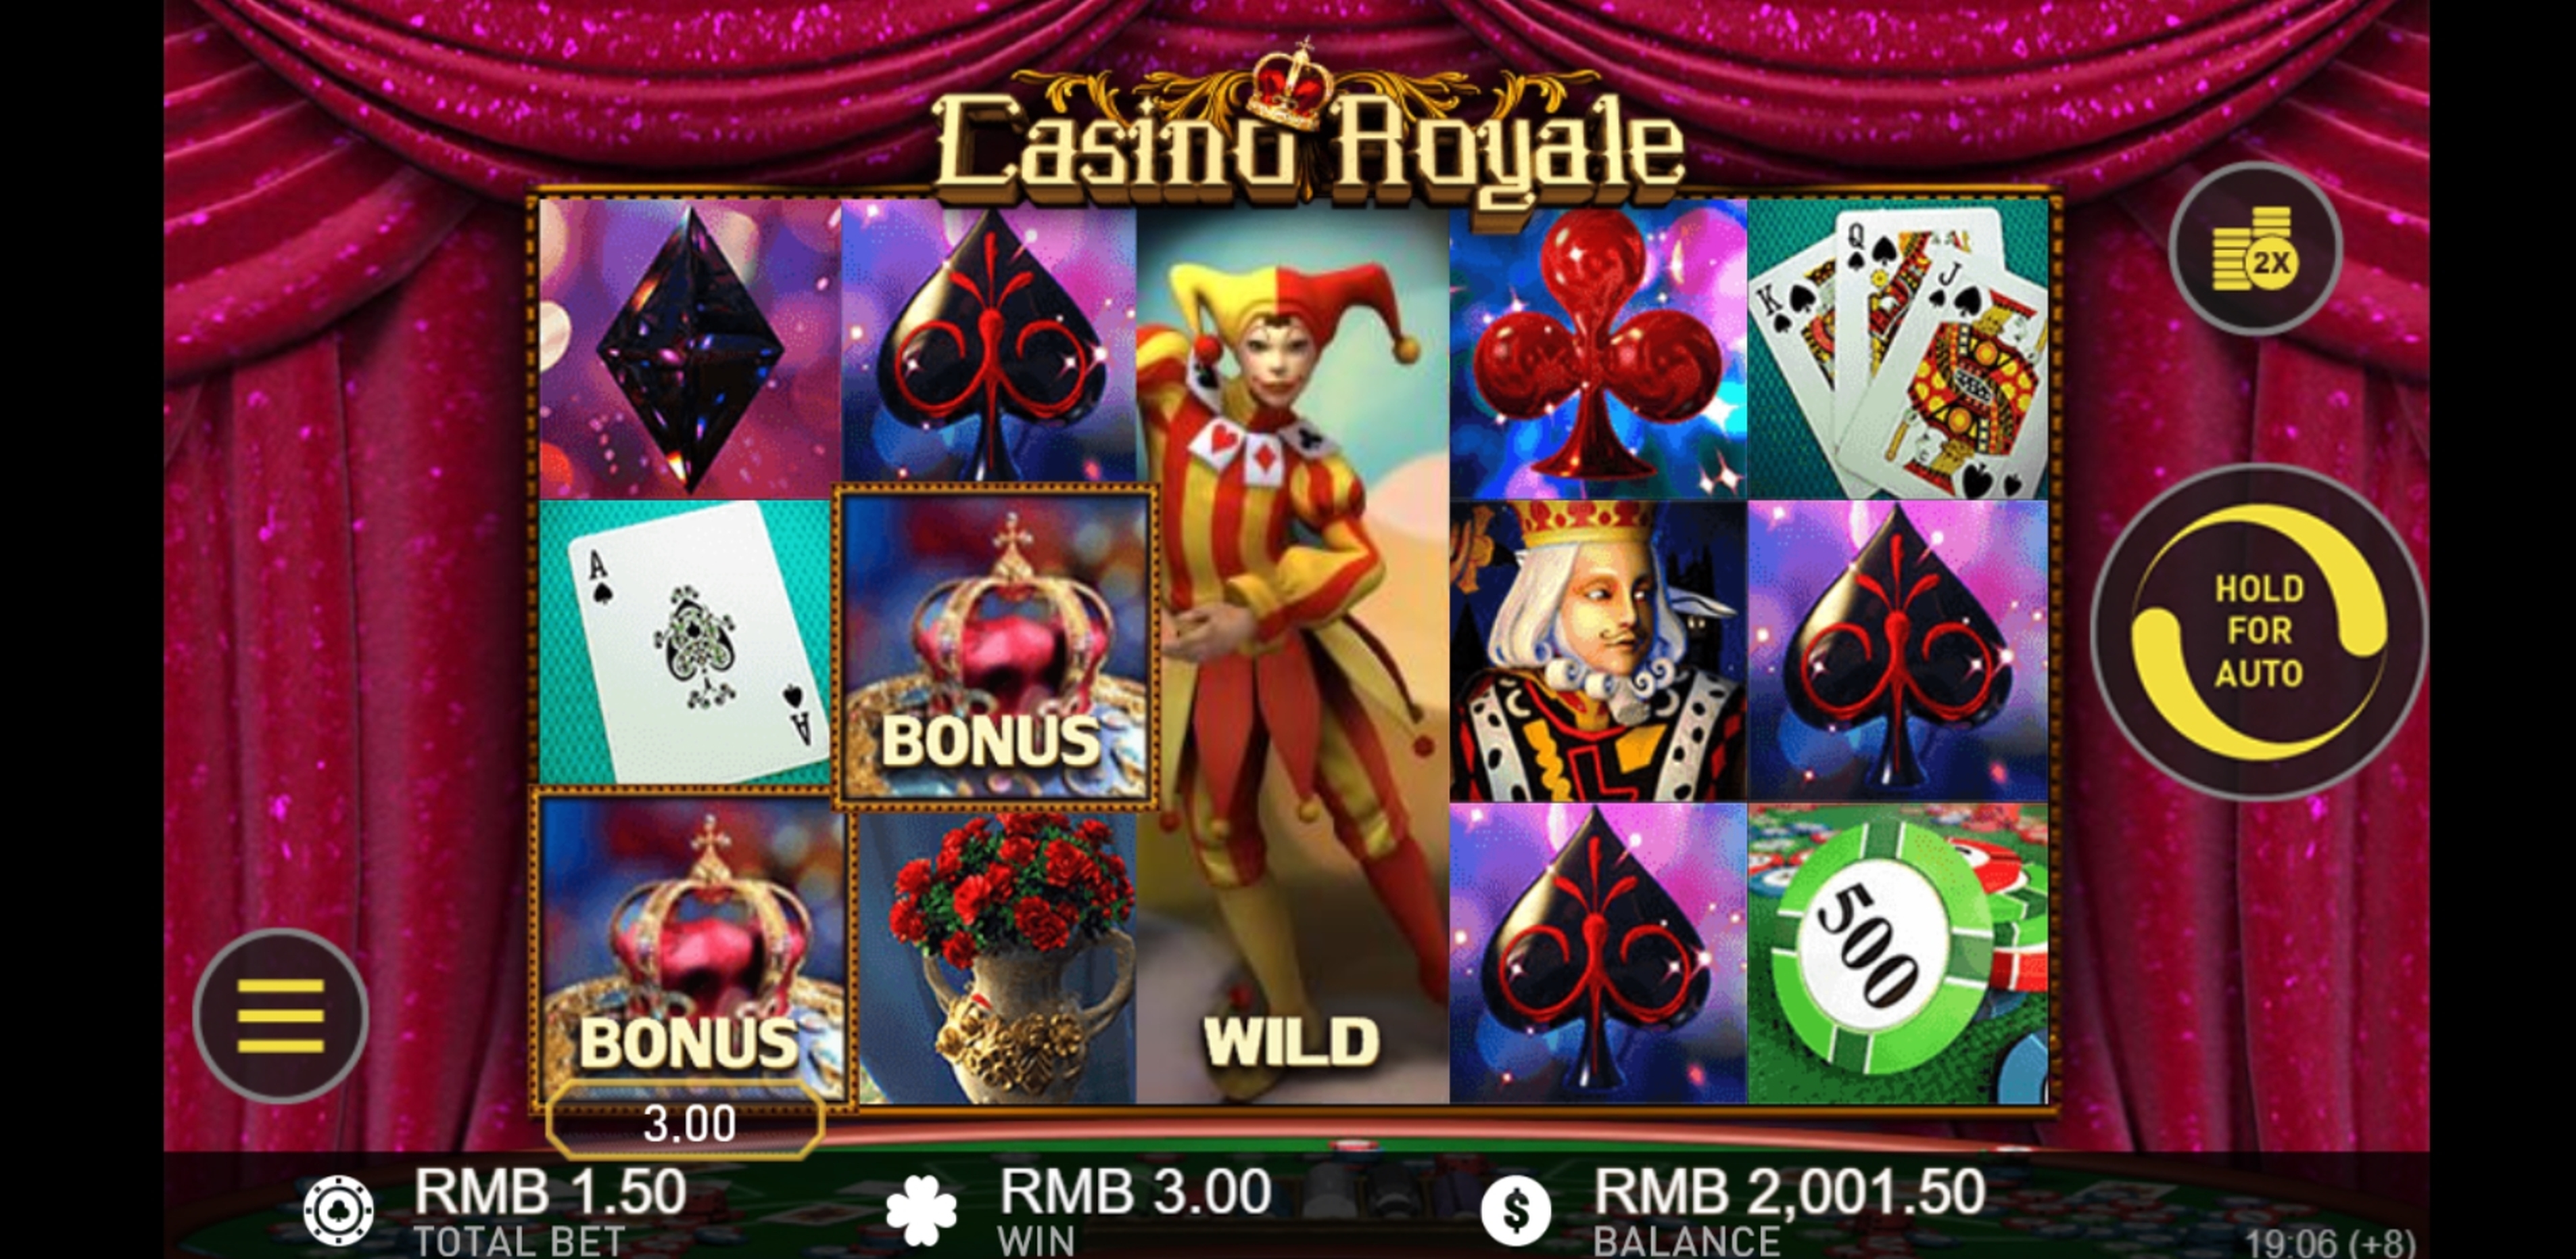 Win Money in Casino Royale Free Slot Game by Gameplay Interactive